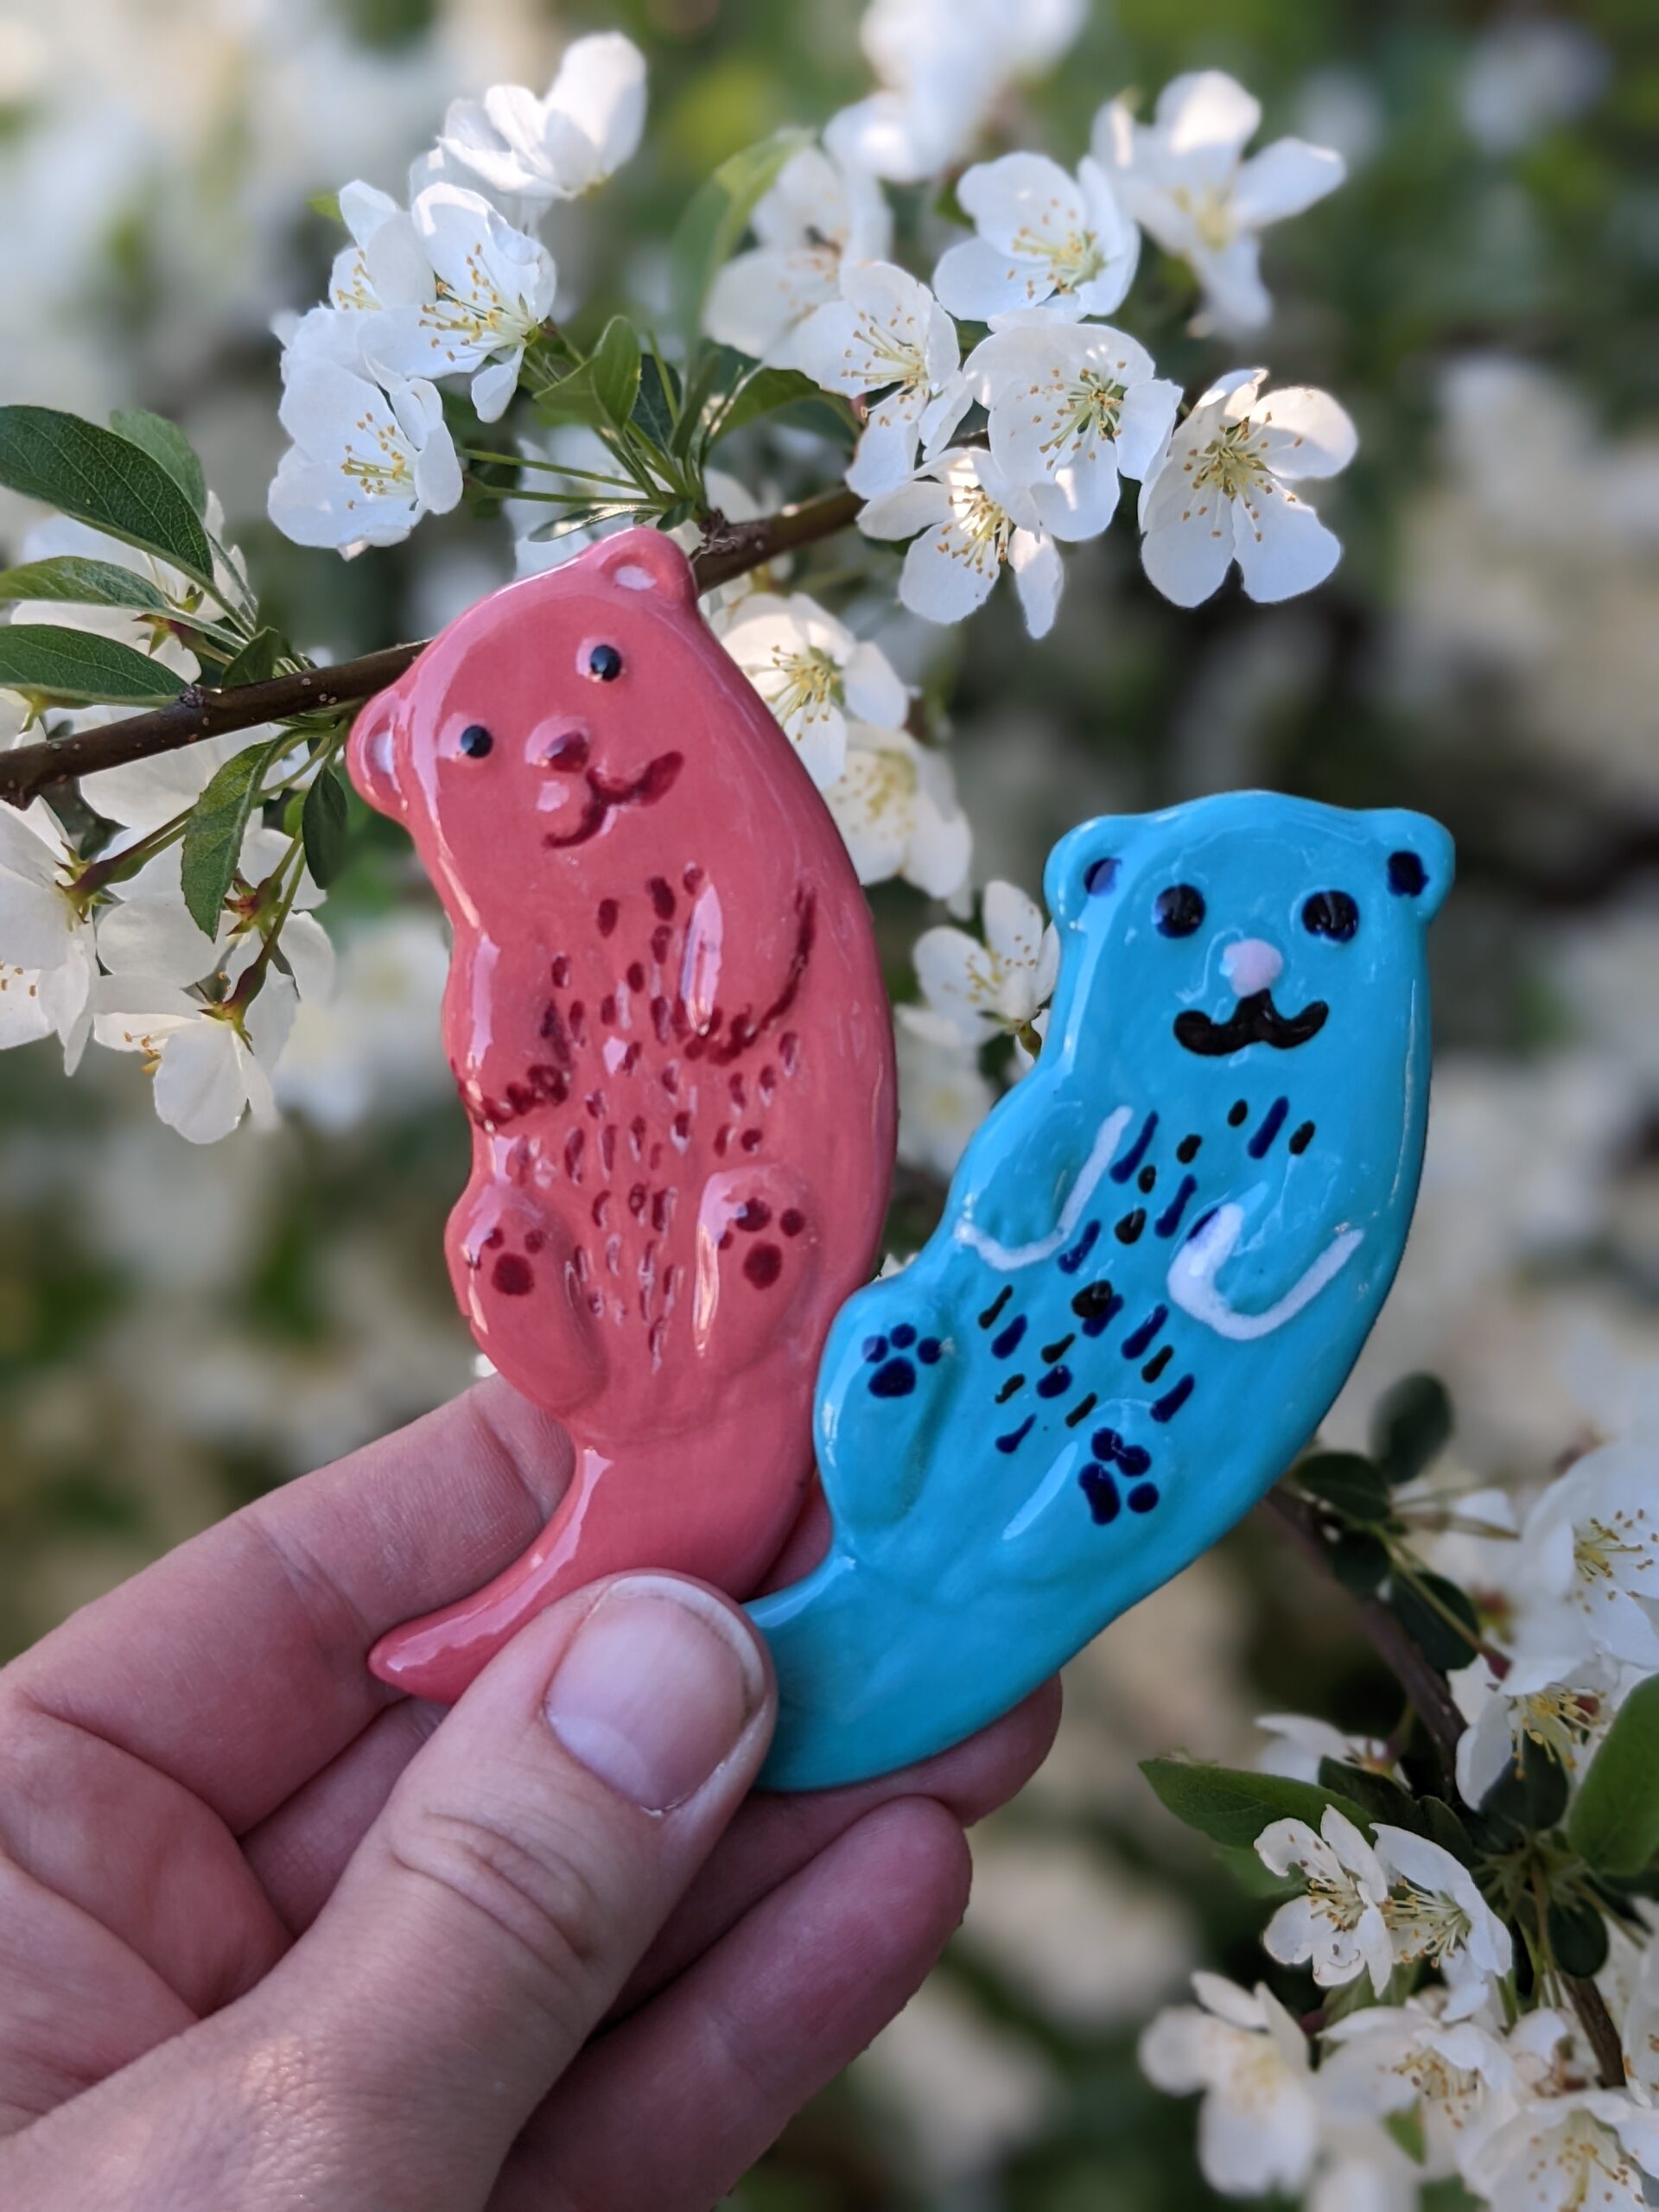 A hand holding two cookies shaped like animals.